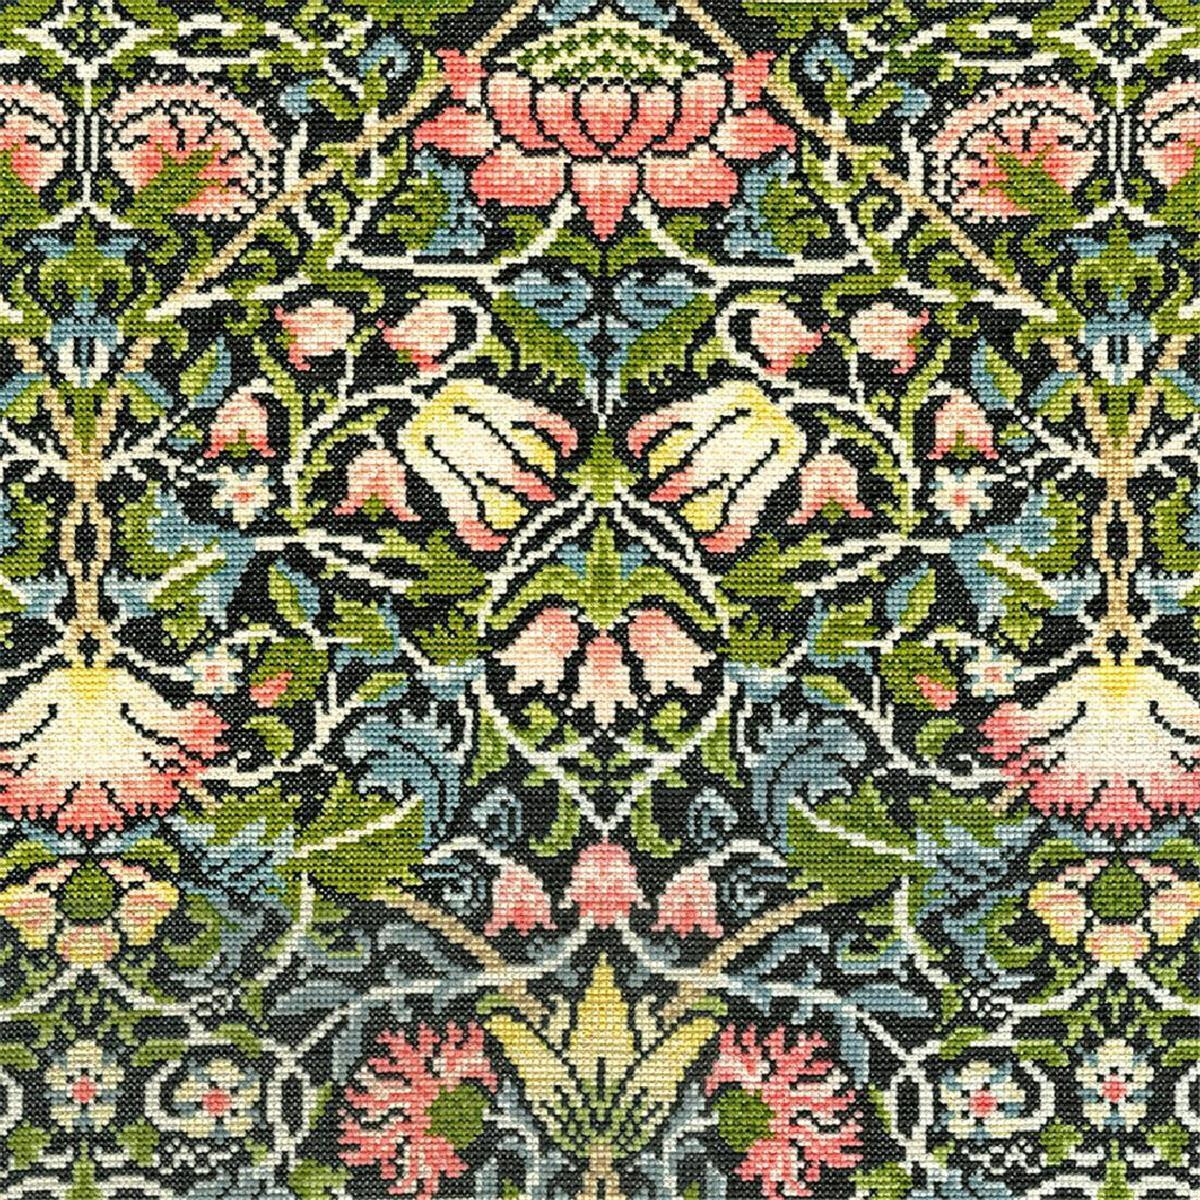 An intricate floral tapestry, reminiscent of an...